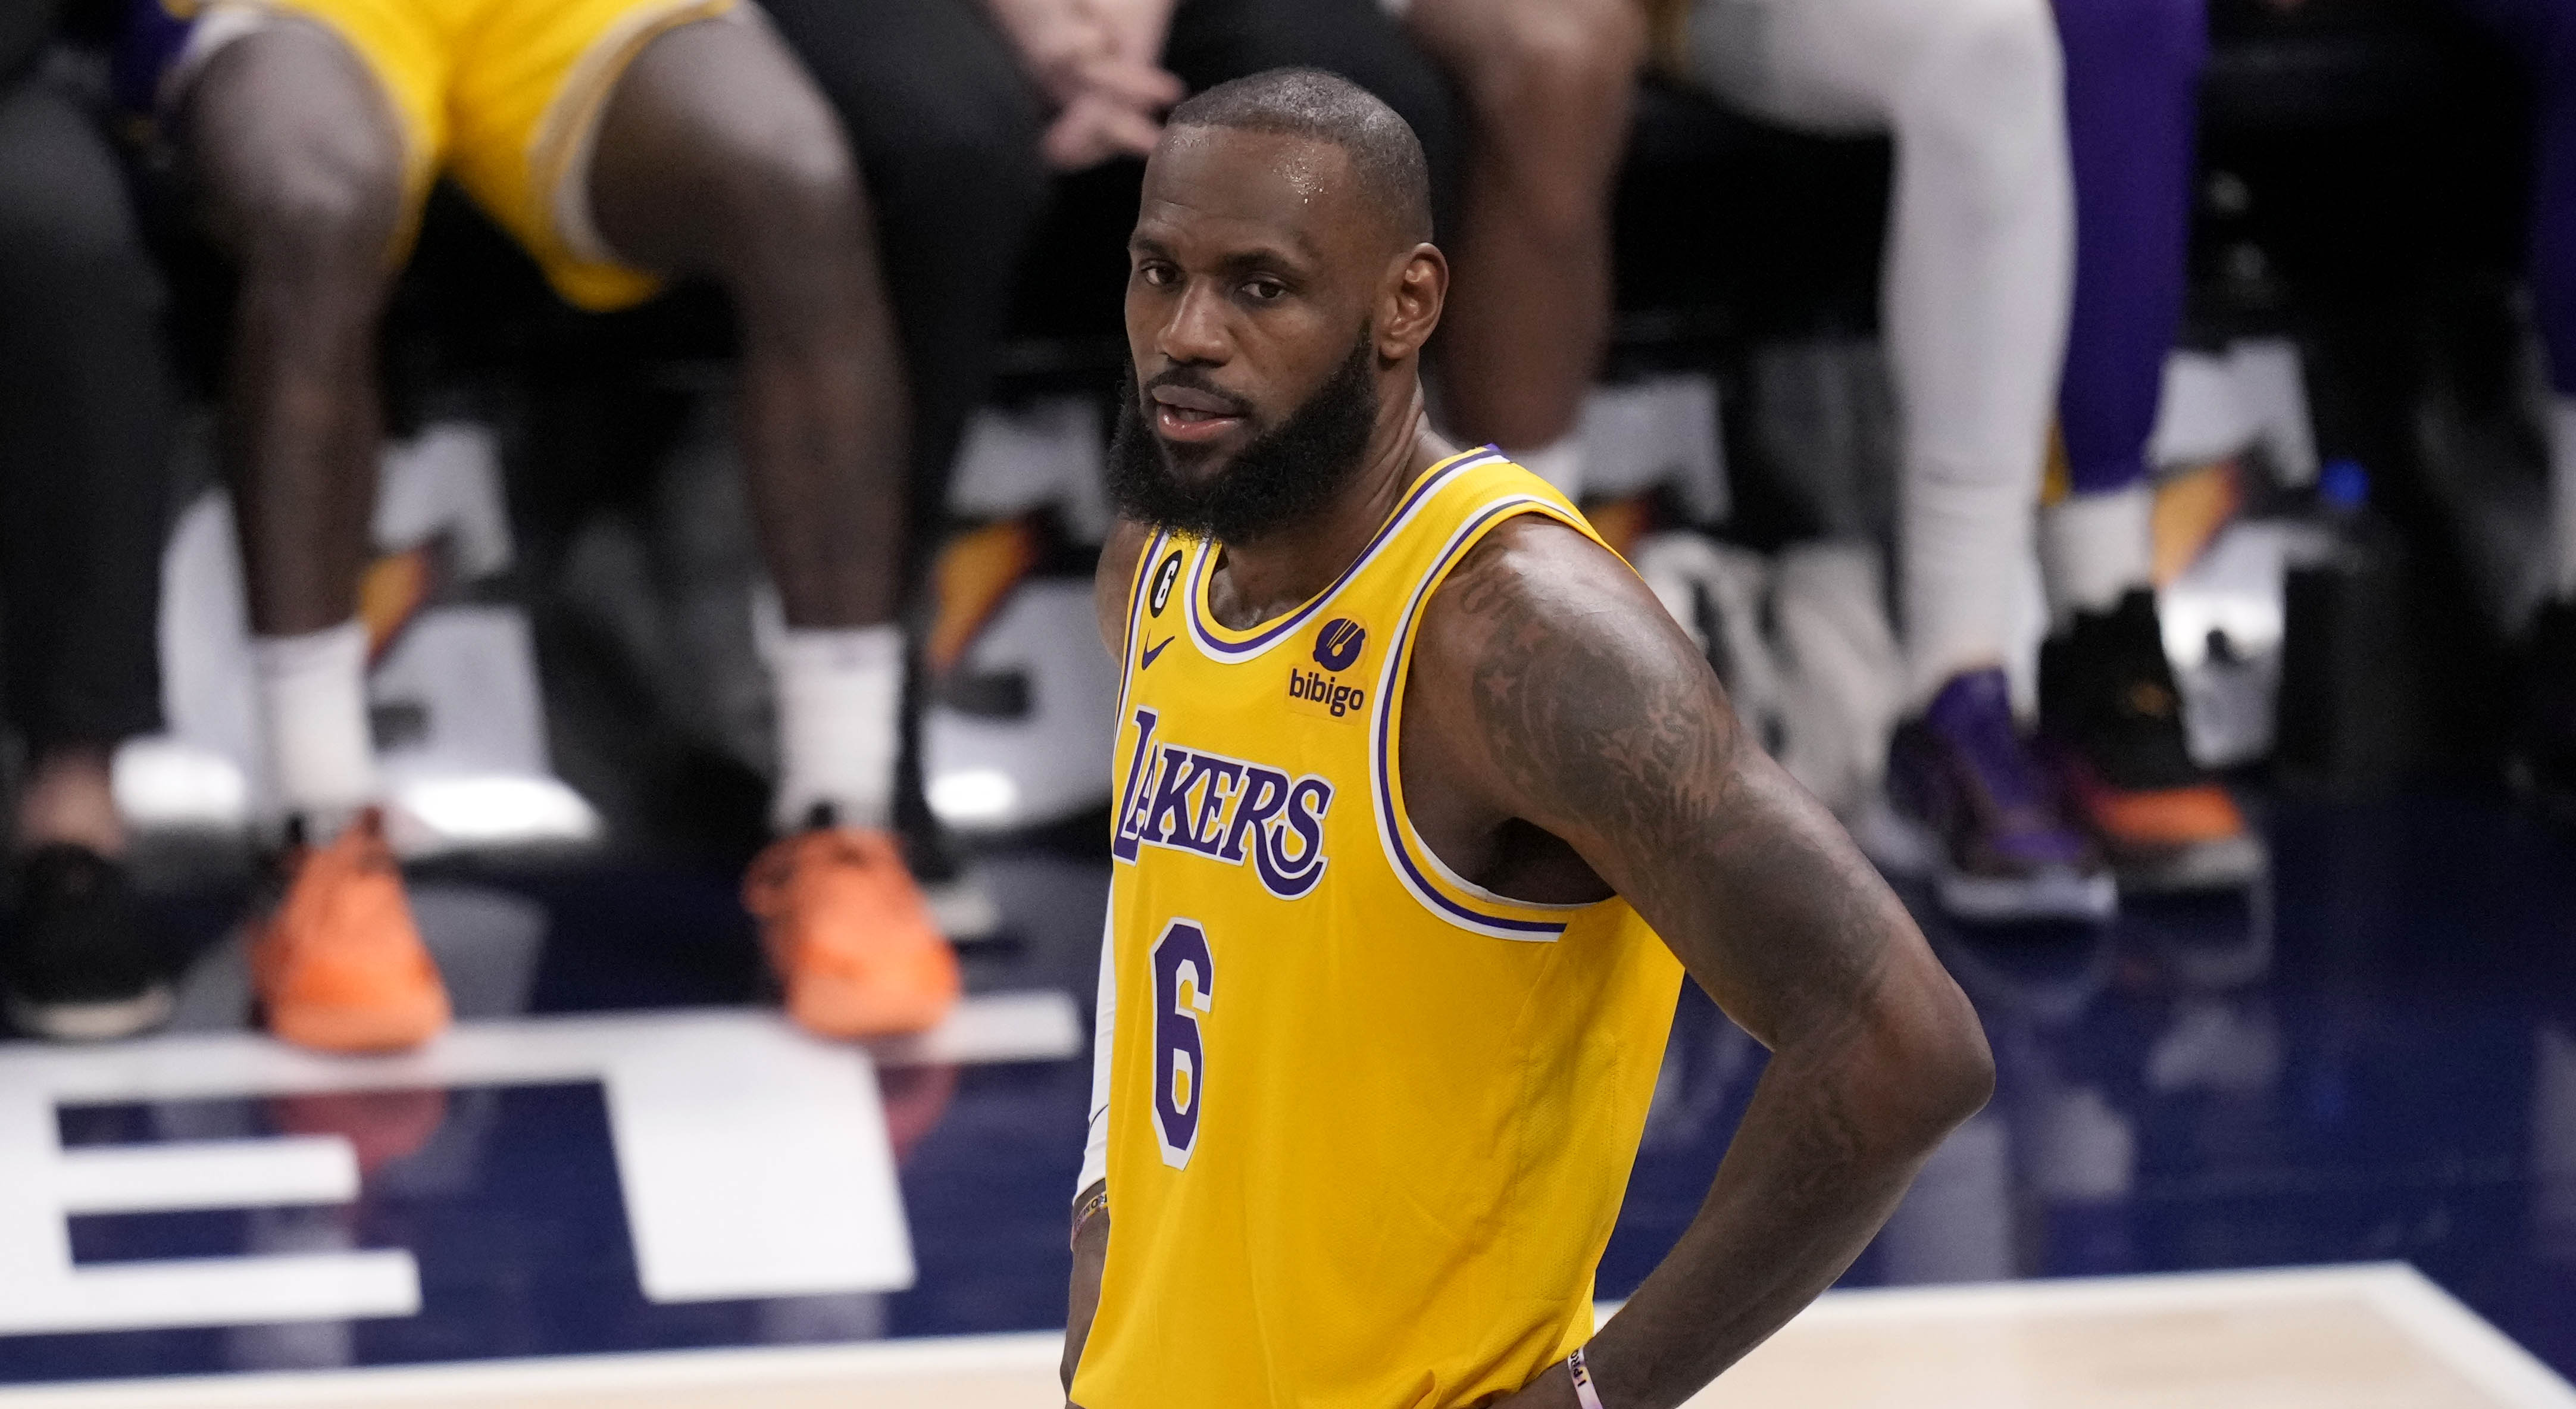 LeBron James Is Second on Forbes' Top 10 Highest Paid Athletes List